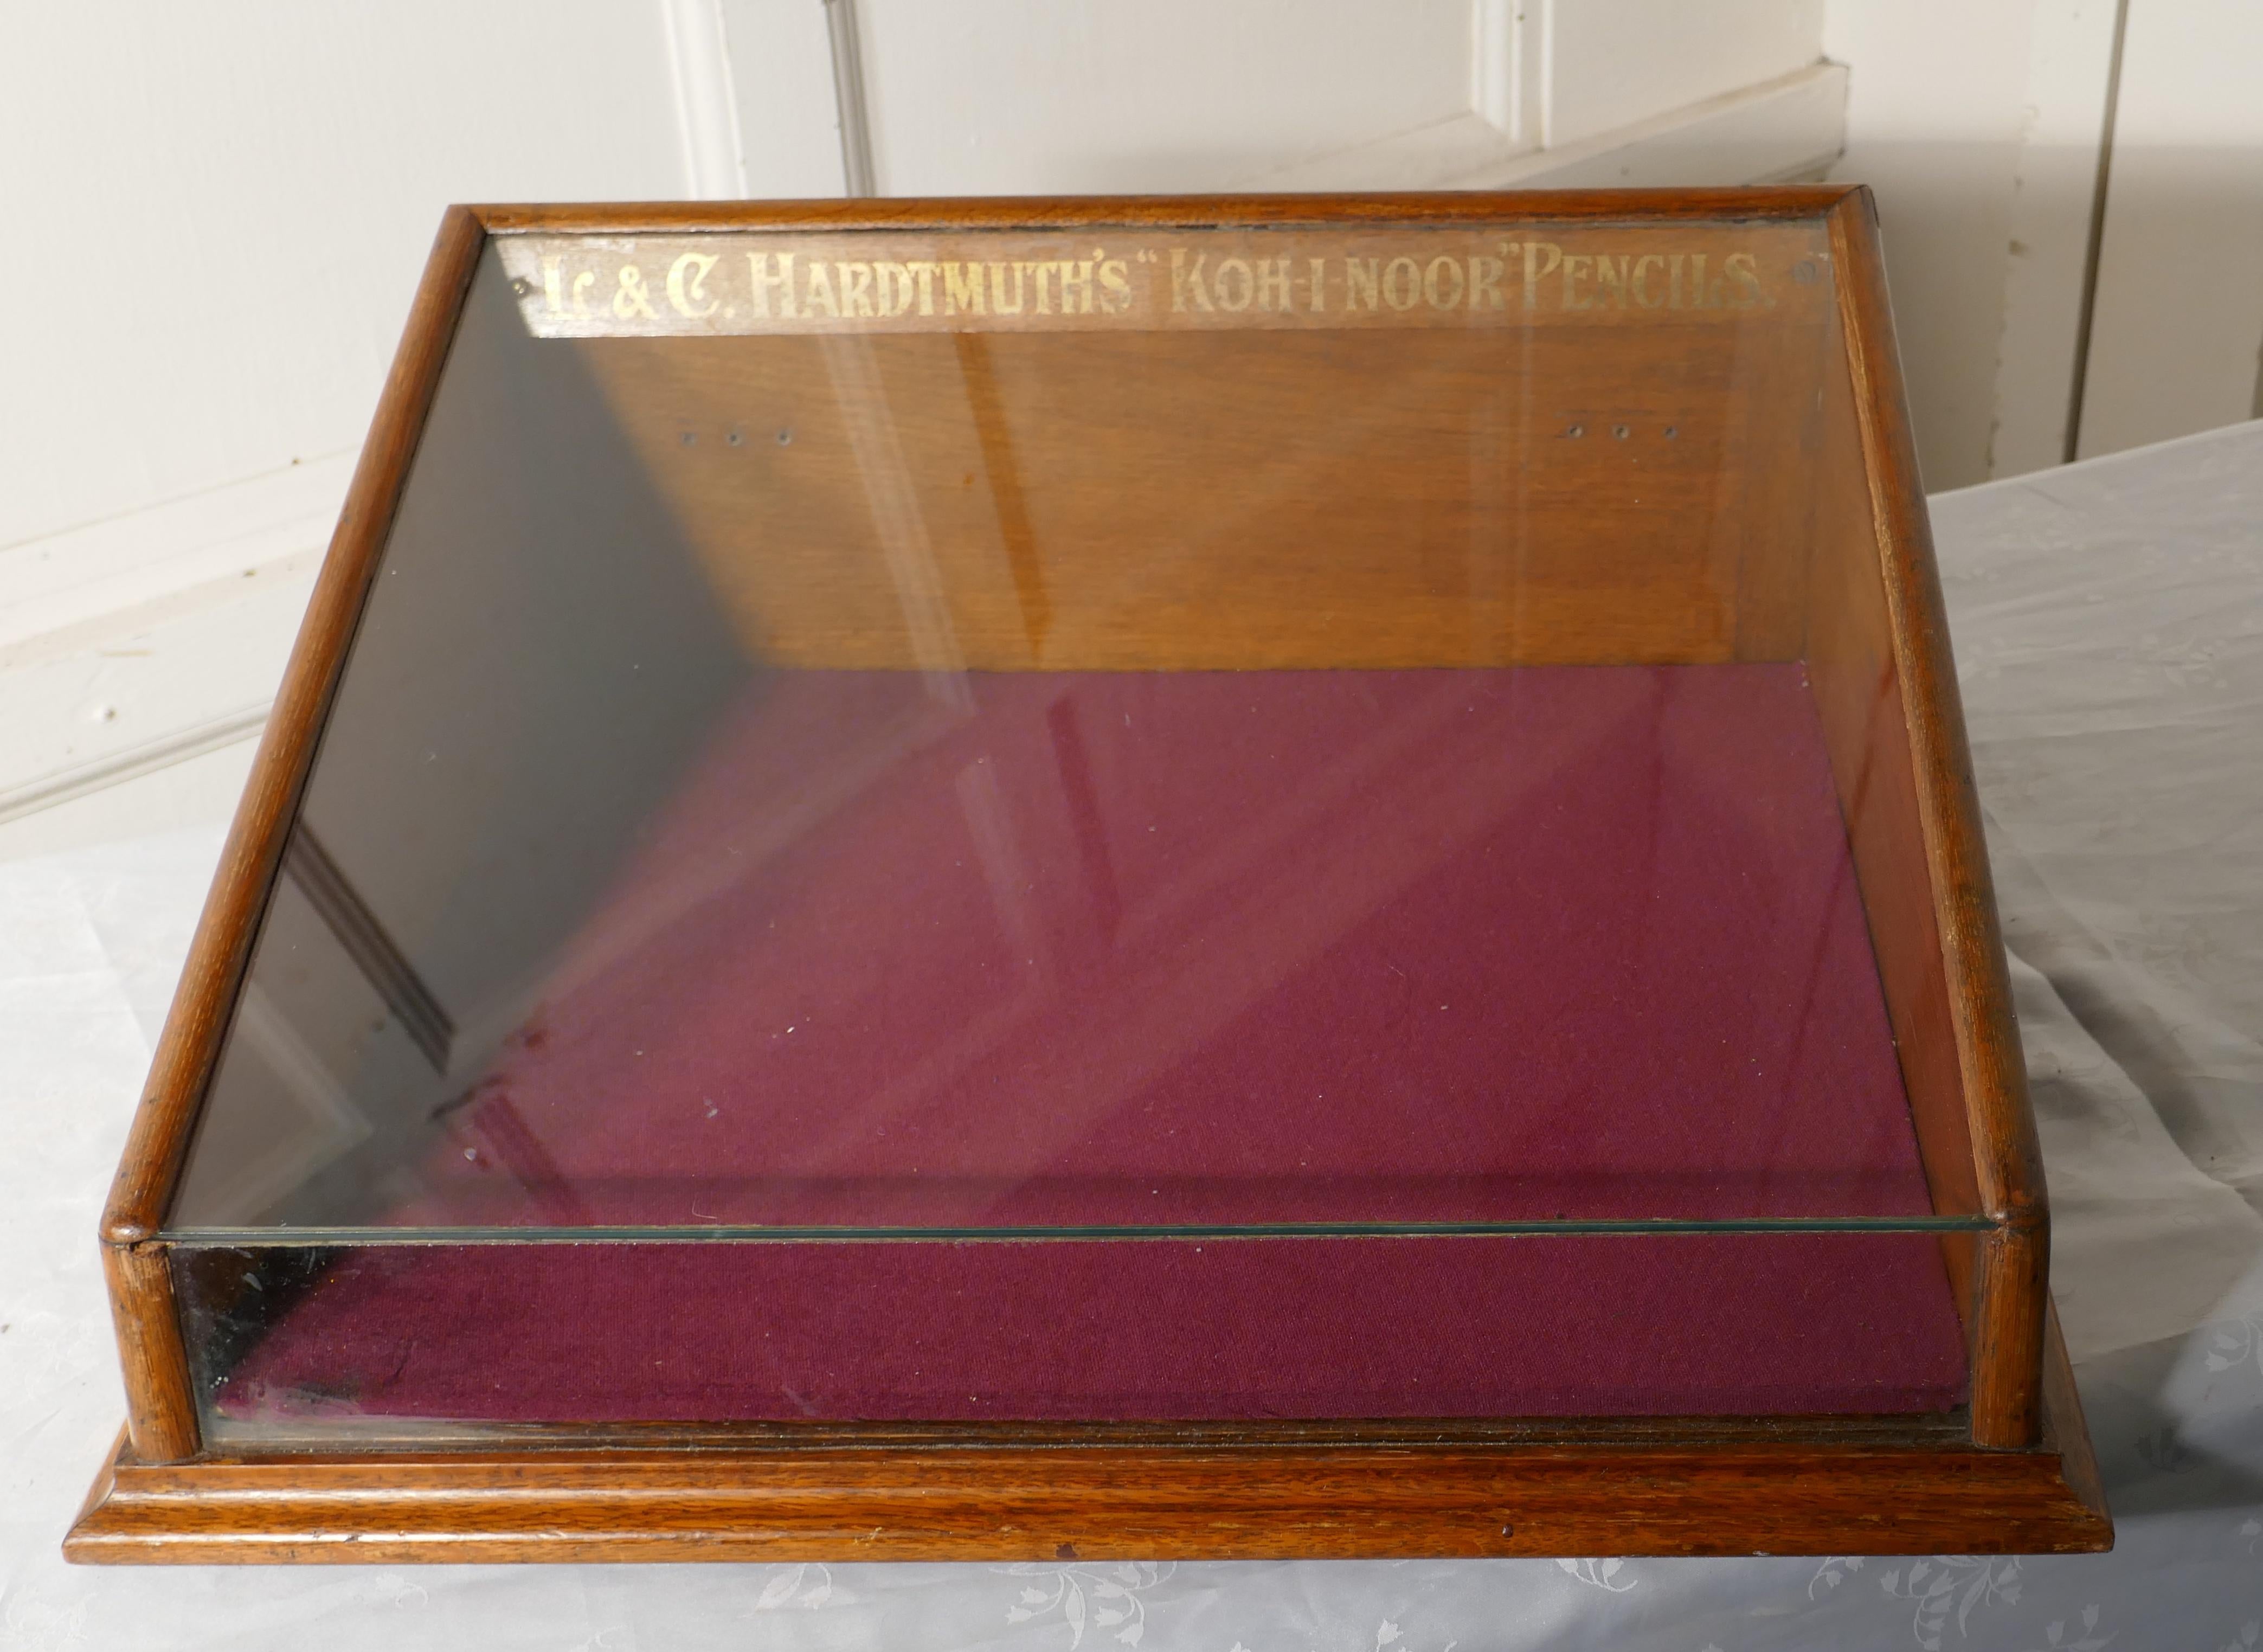 Counter top Display Cabinet for L & C HARDMUTH’S “KOH-I NOOR” Pencils In Good Condition In Chillerton, Isle of Wight